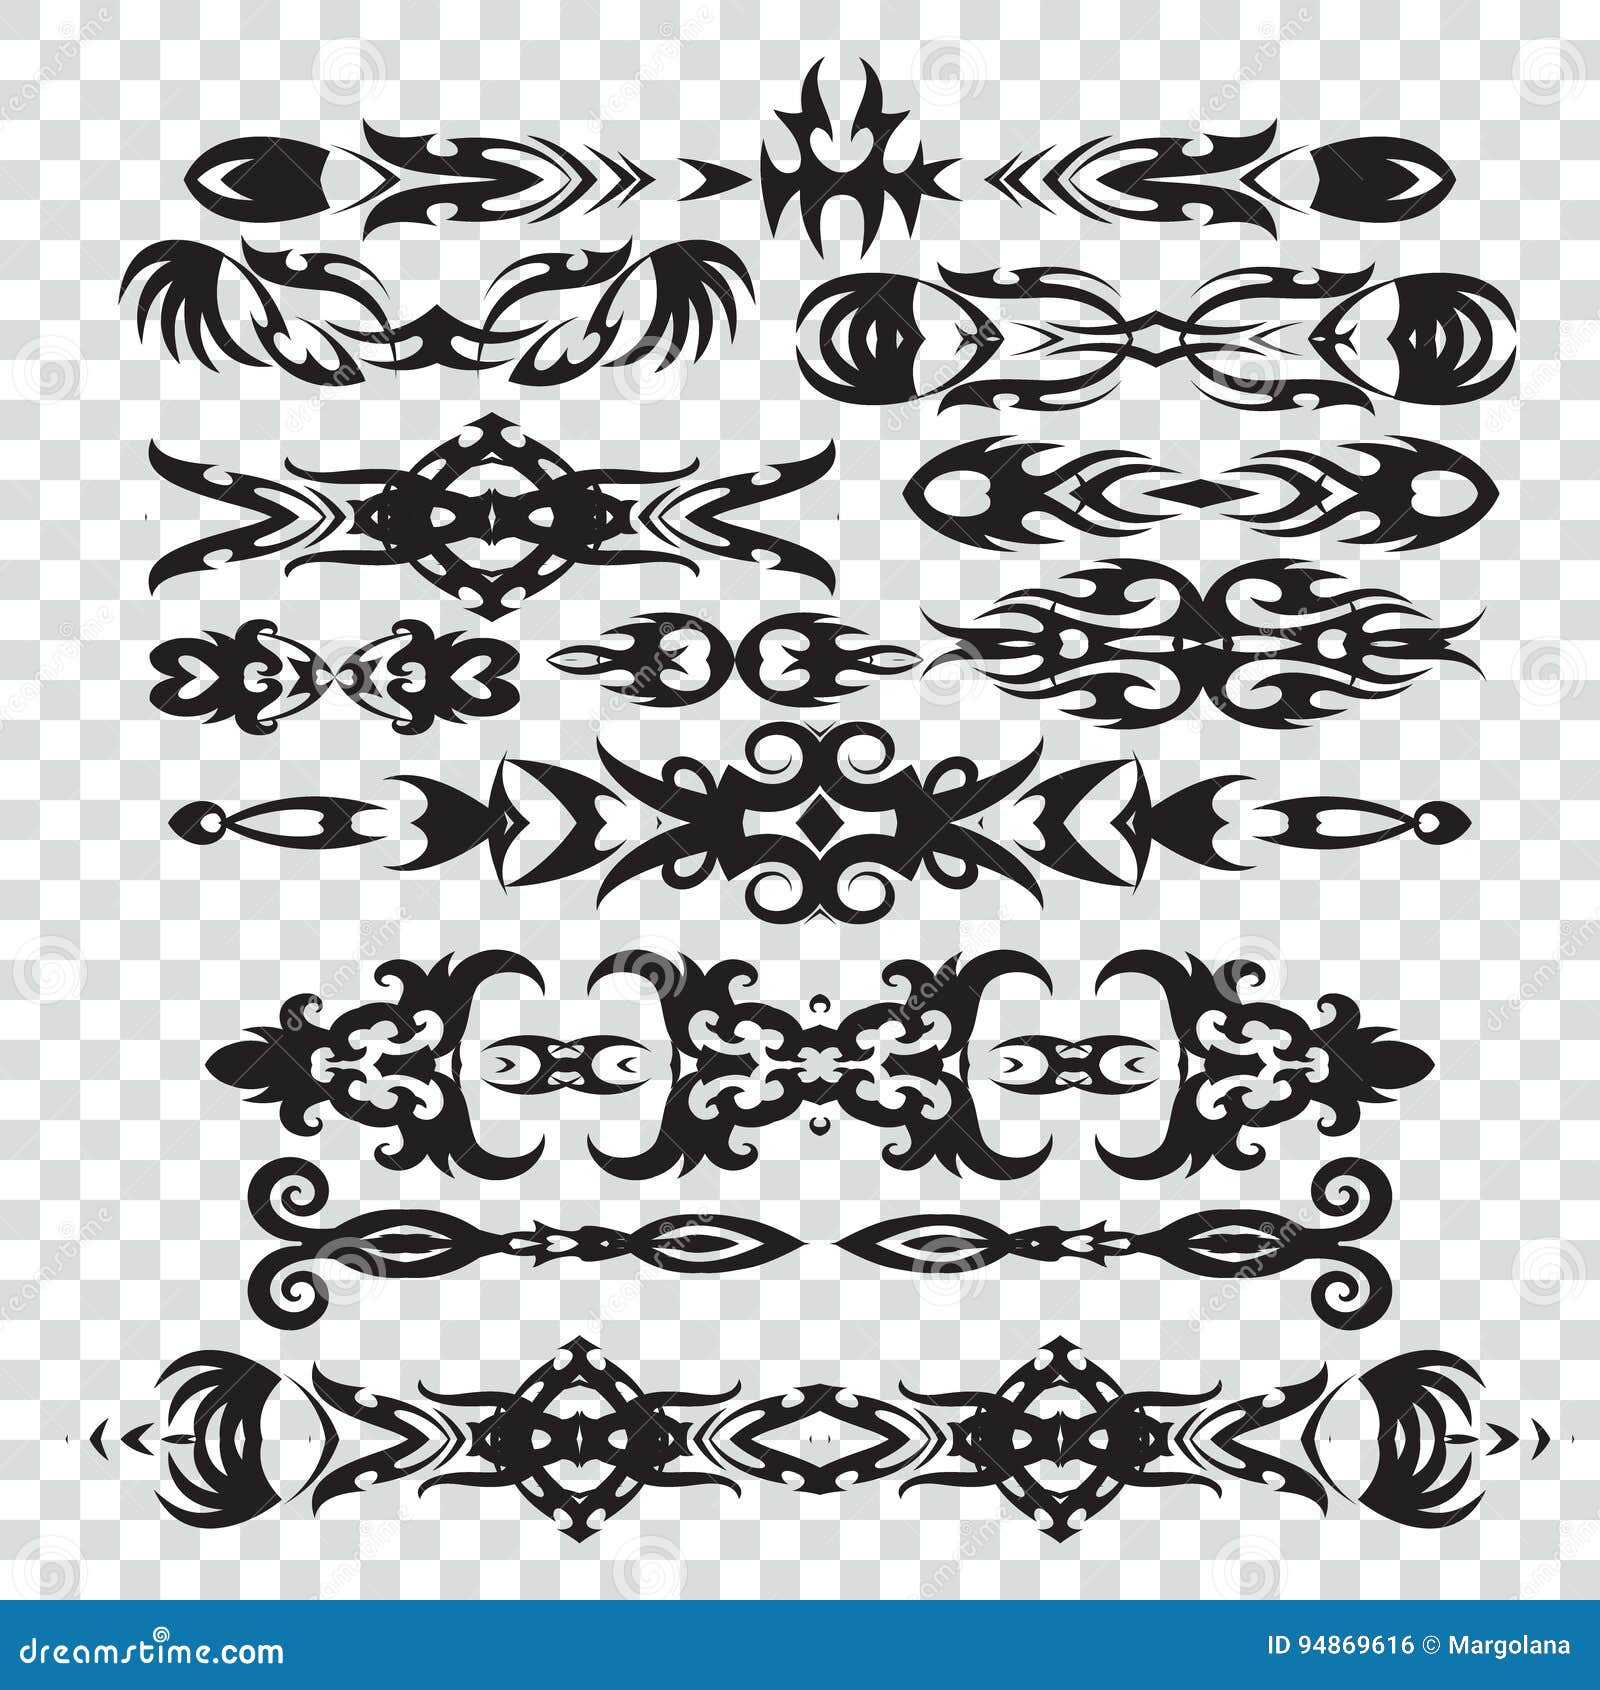 Free tattoo PSD Templates | FreeImages